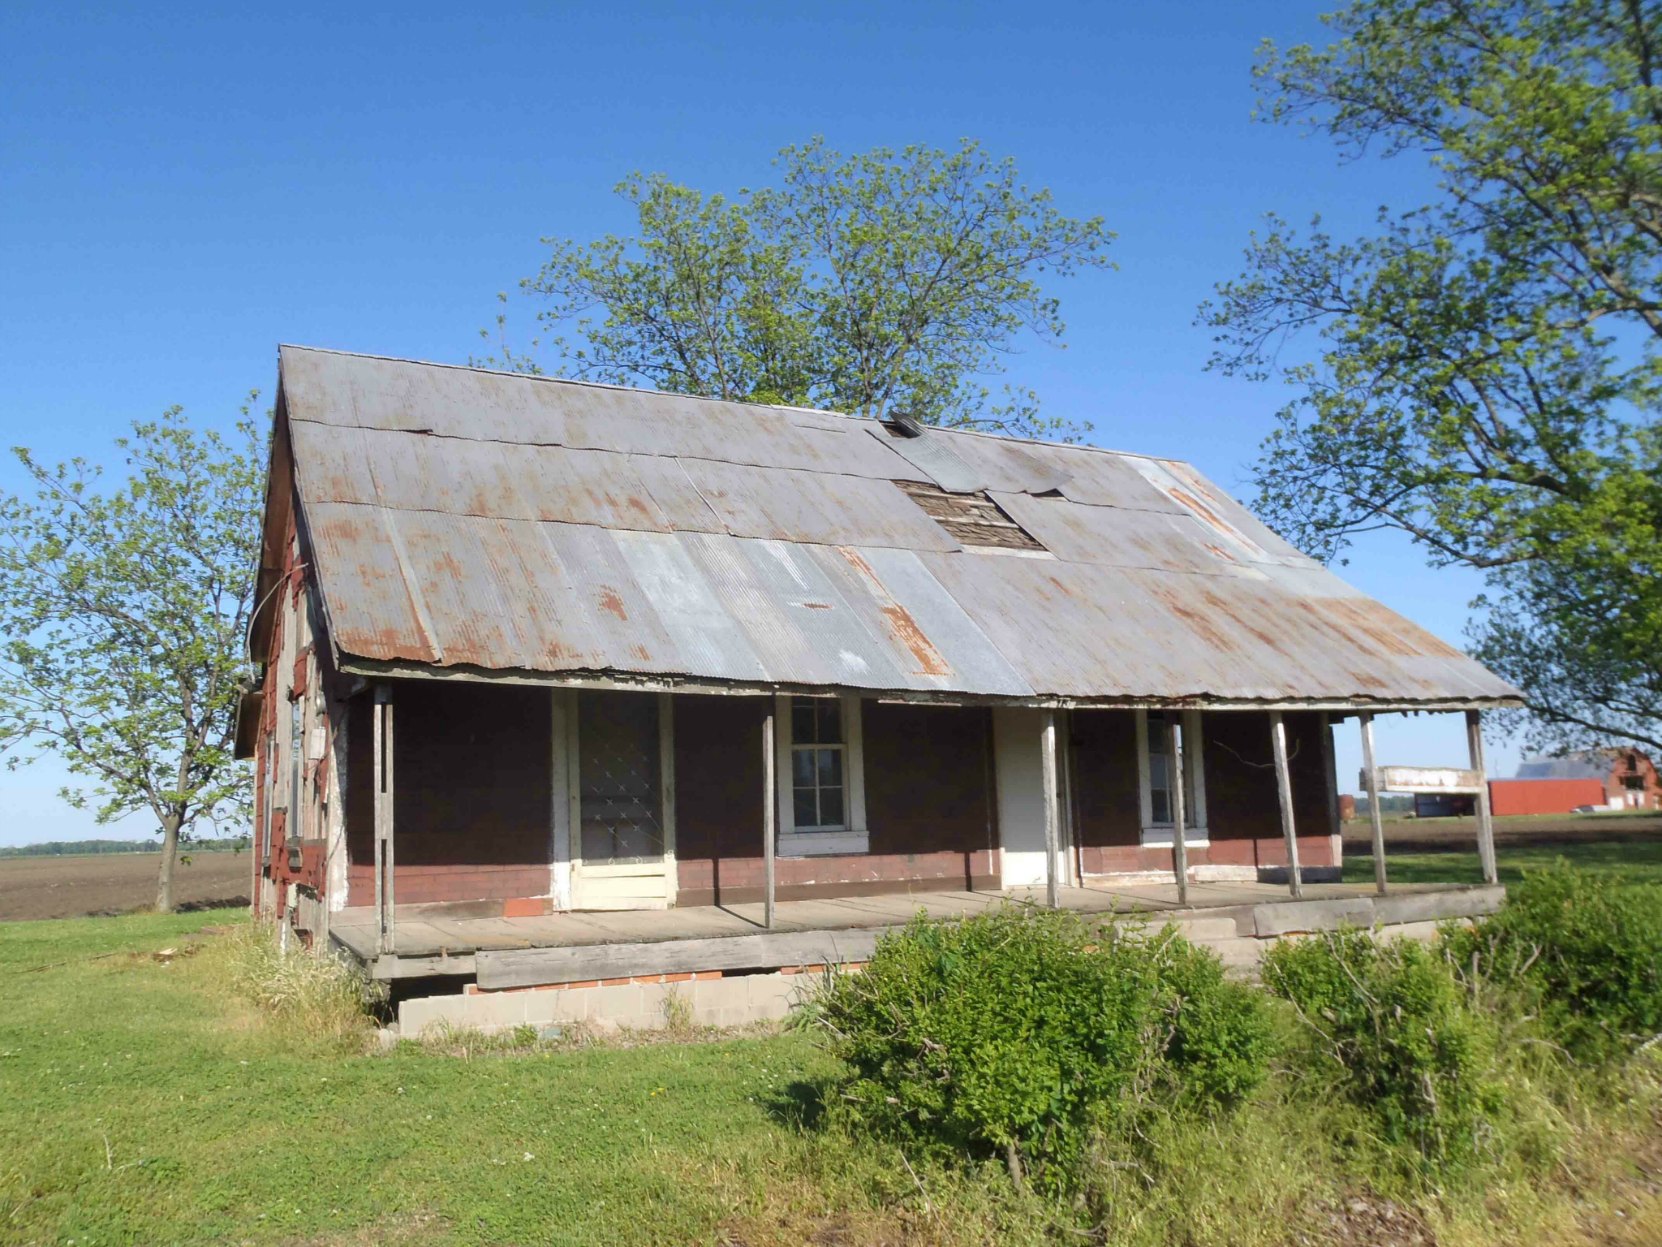 This abandoned house on the highway between the Muddy Waters House site and the Stovall farms entrance gives some indication of farm housing at the time Muddy Waters lived at Stovall Farms.